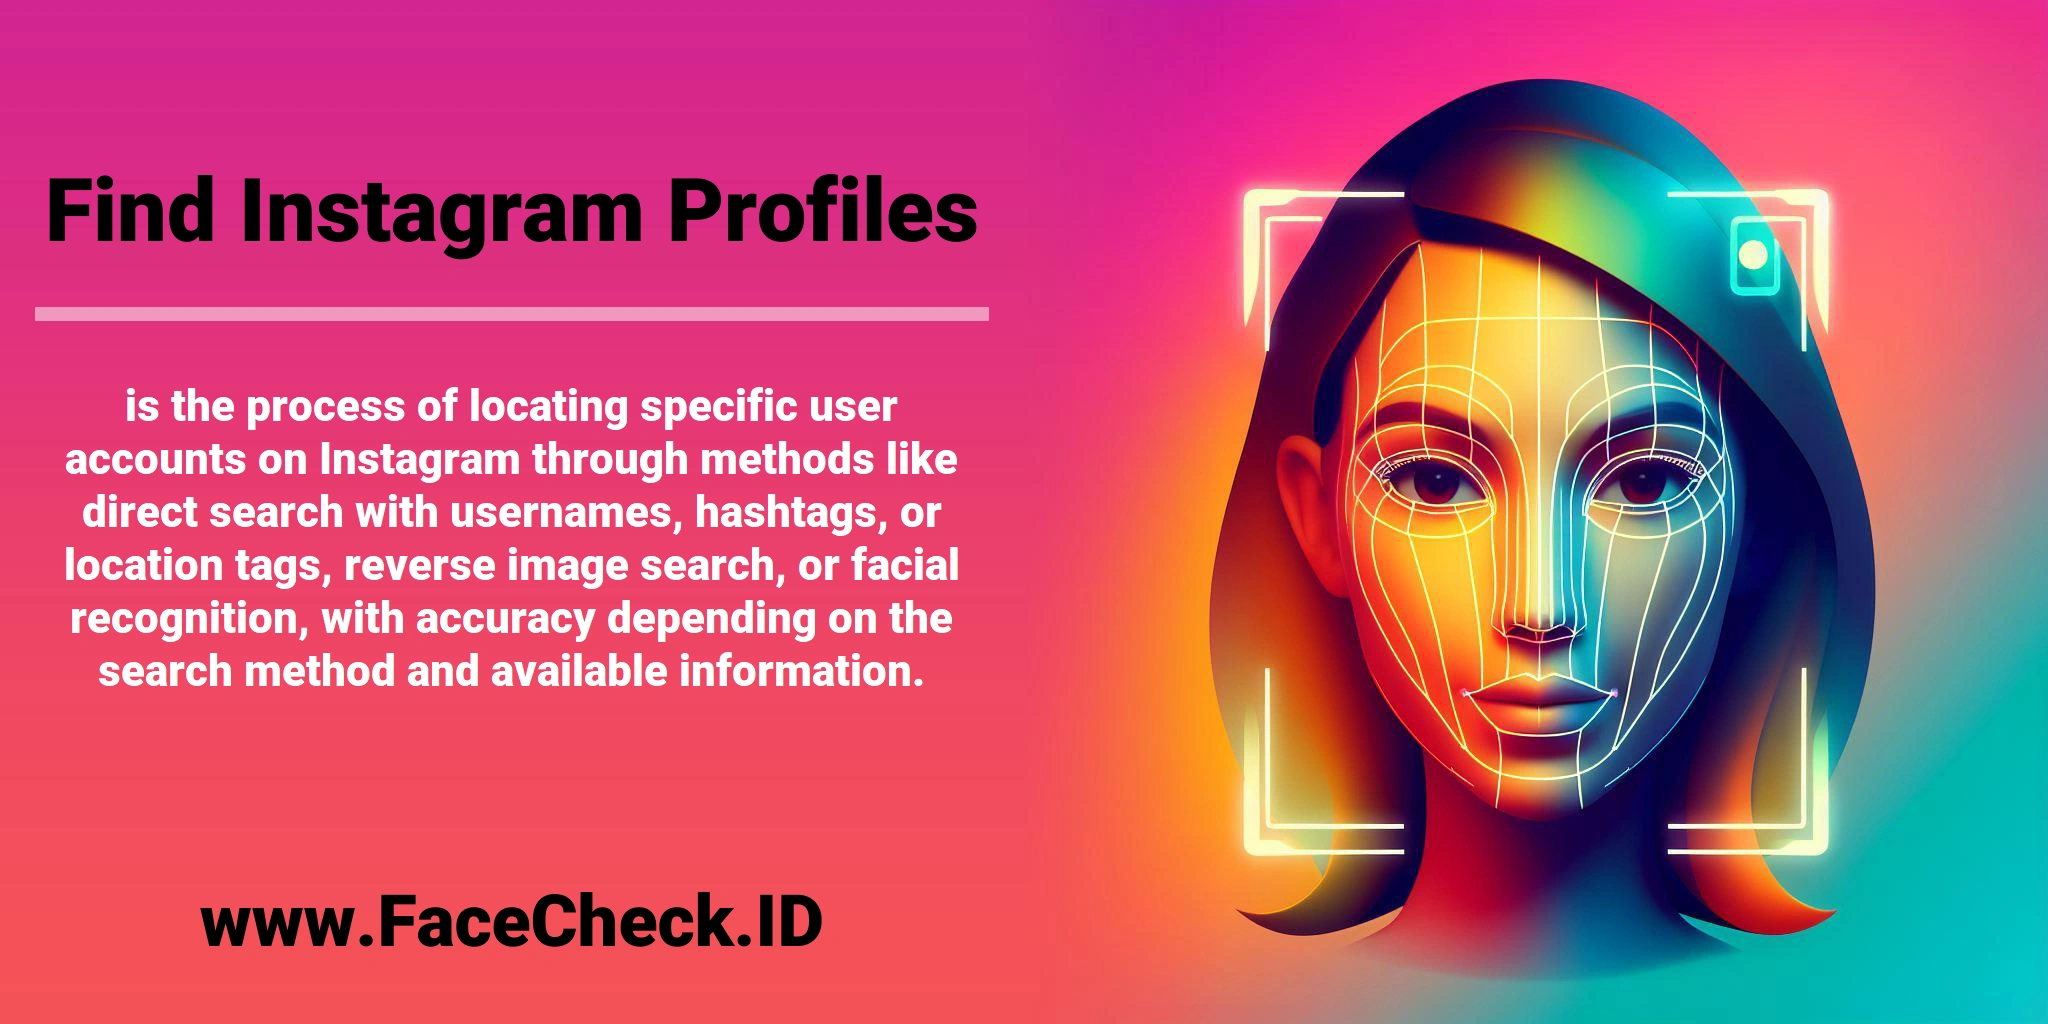 <b>Find Instagram Profiles</b> is the process of locating specific user accounts on Instagram through methods like direct search with usernames, hashtags, or location tags, reverse image search, or facial recognition, with accuracy depending on the search method and available information.